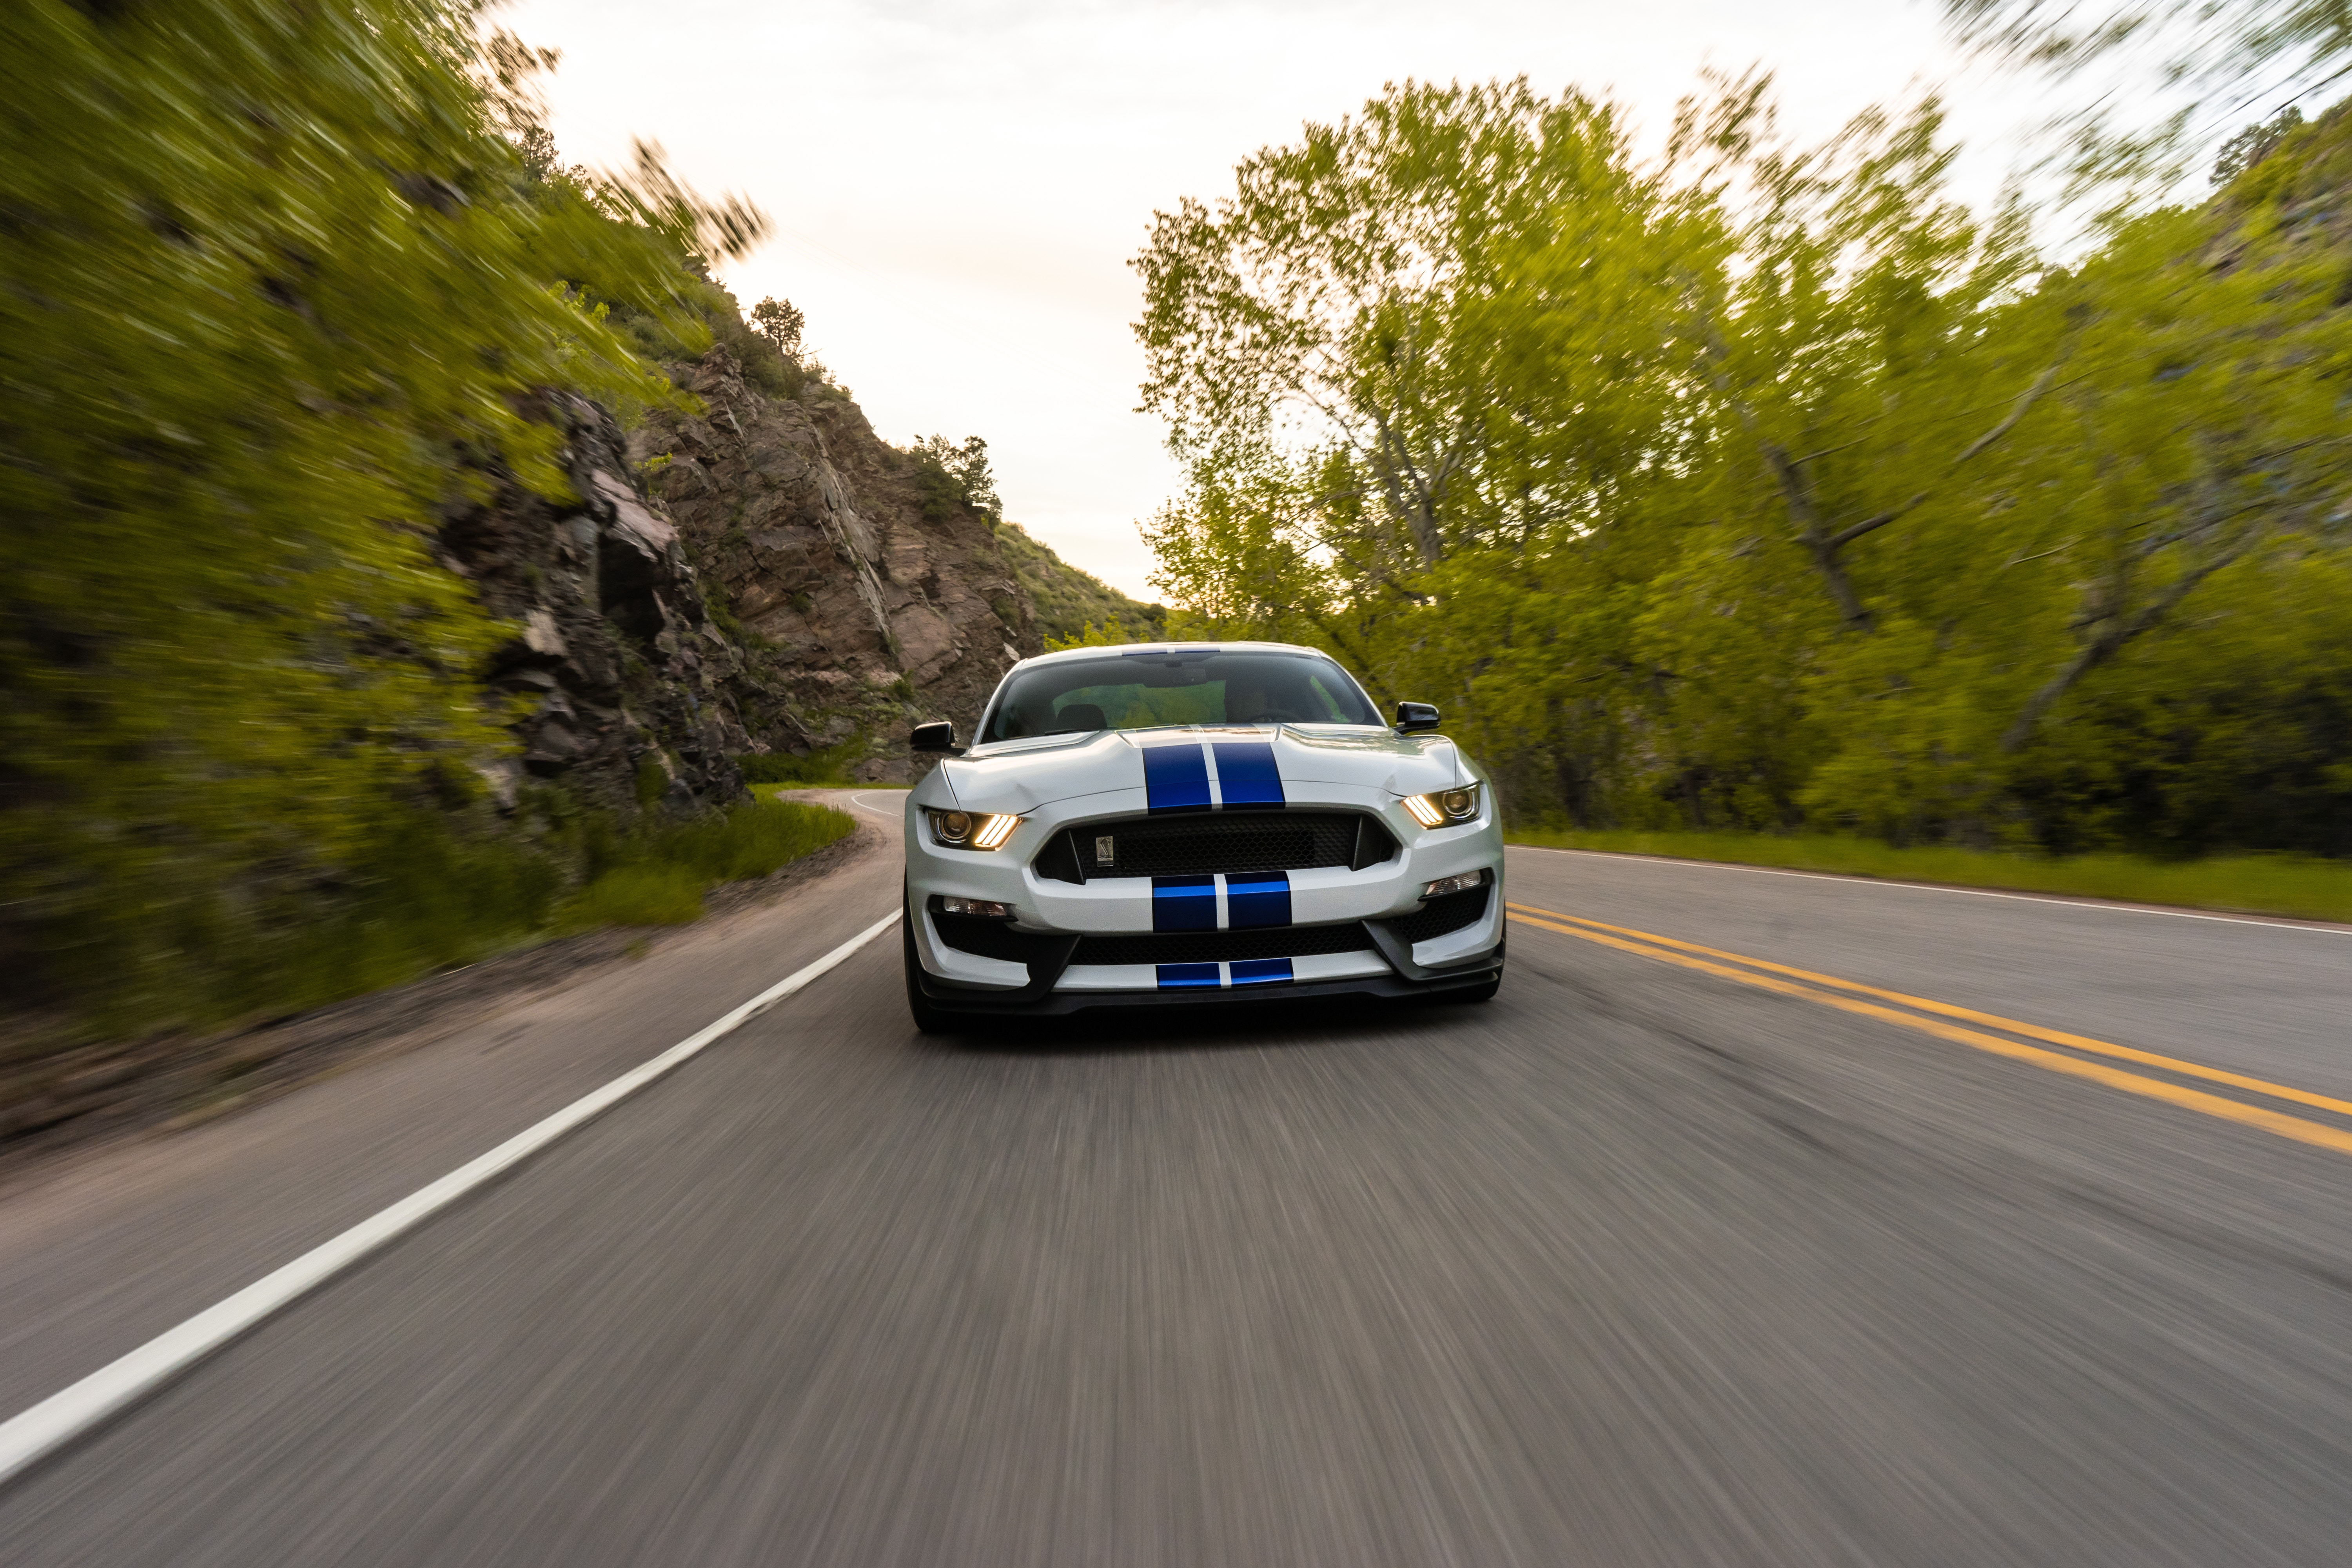 cars, sports car, car, speed, ford mustang gt350, sports, ford, road, machine